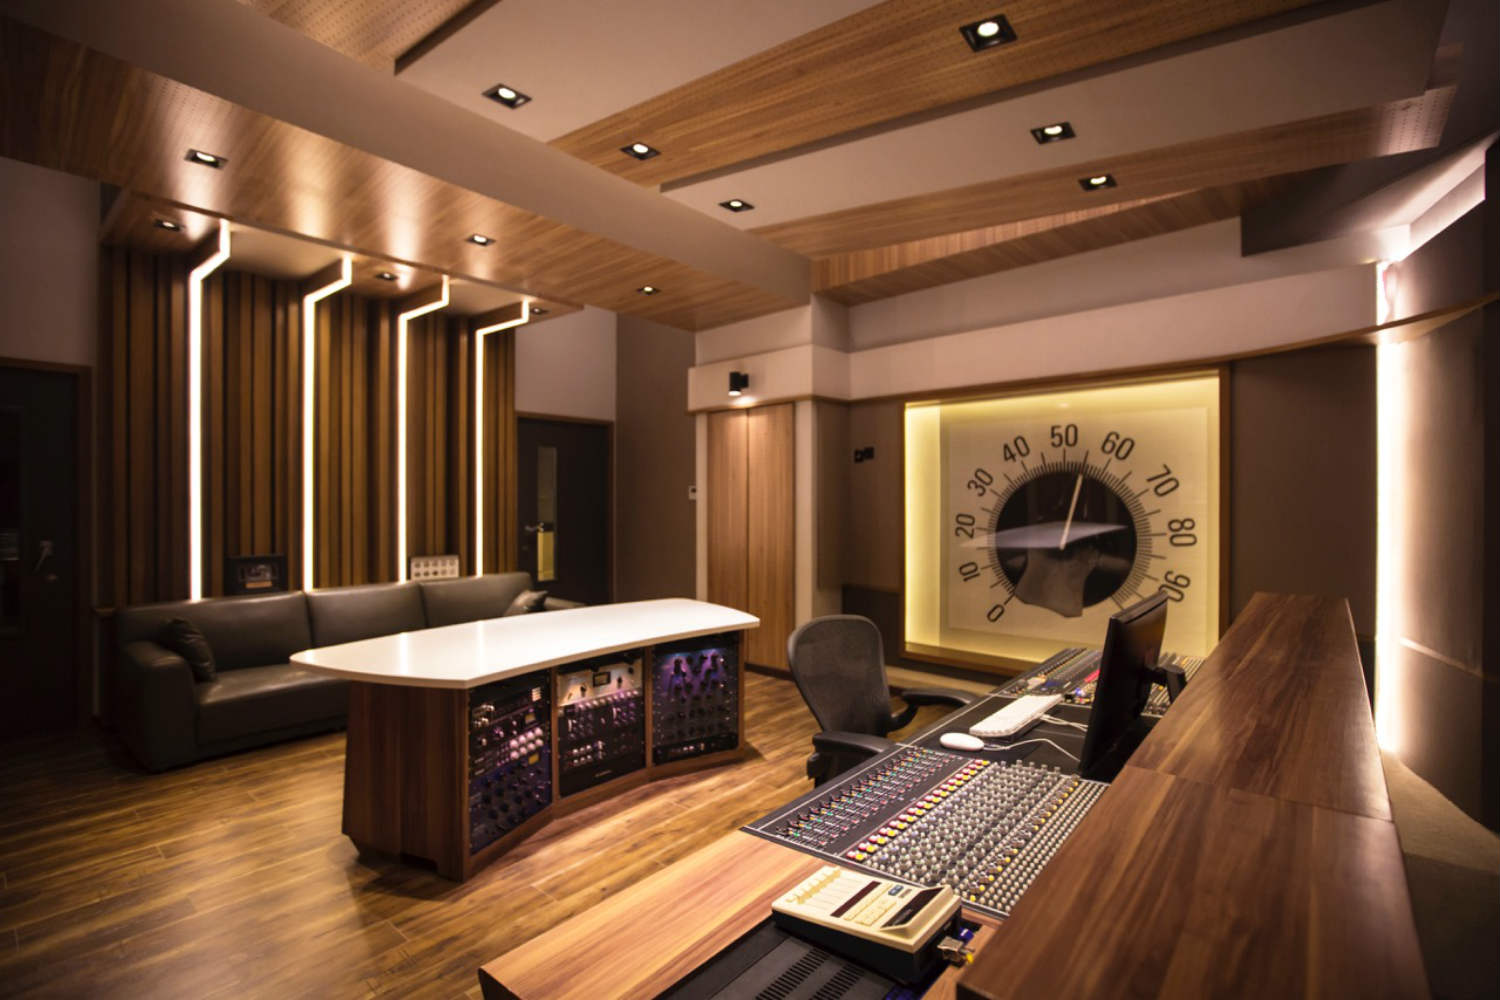 55TEC Studio in Beijing, China - New World-Class Recording Studio designed by WSDG owned by Li You